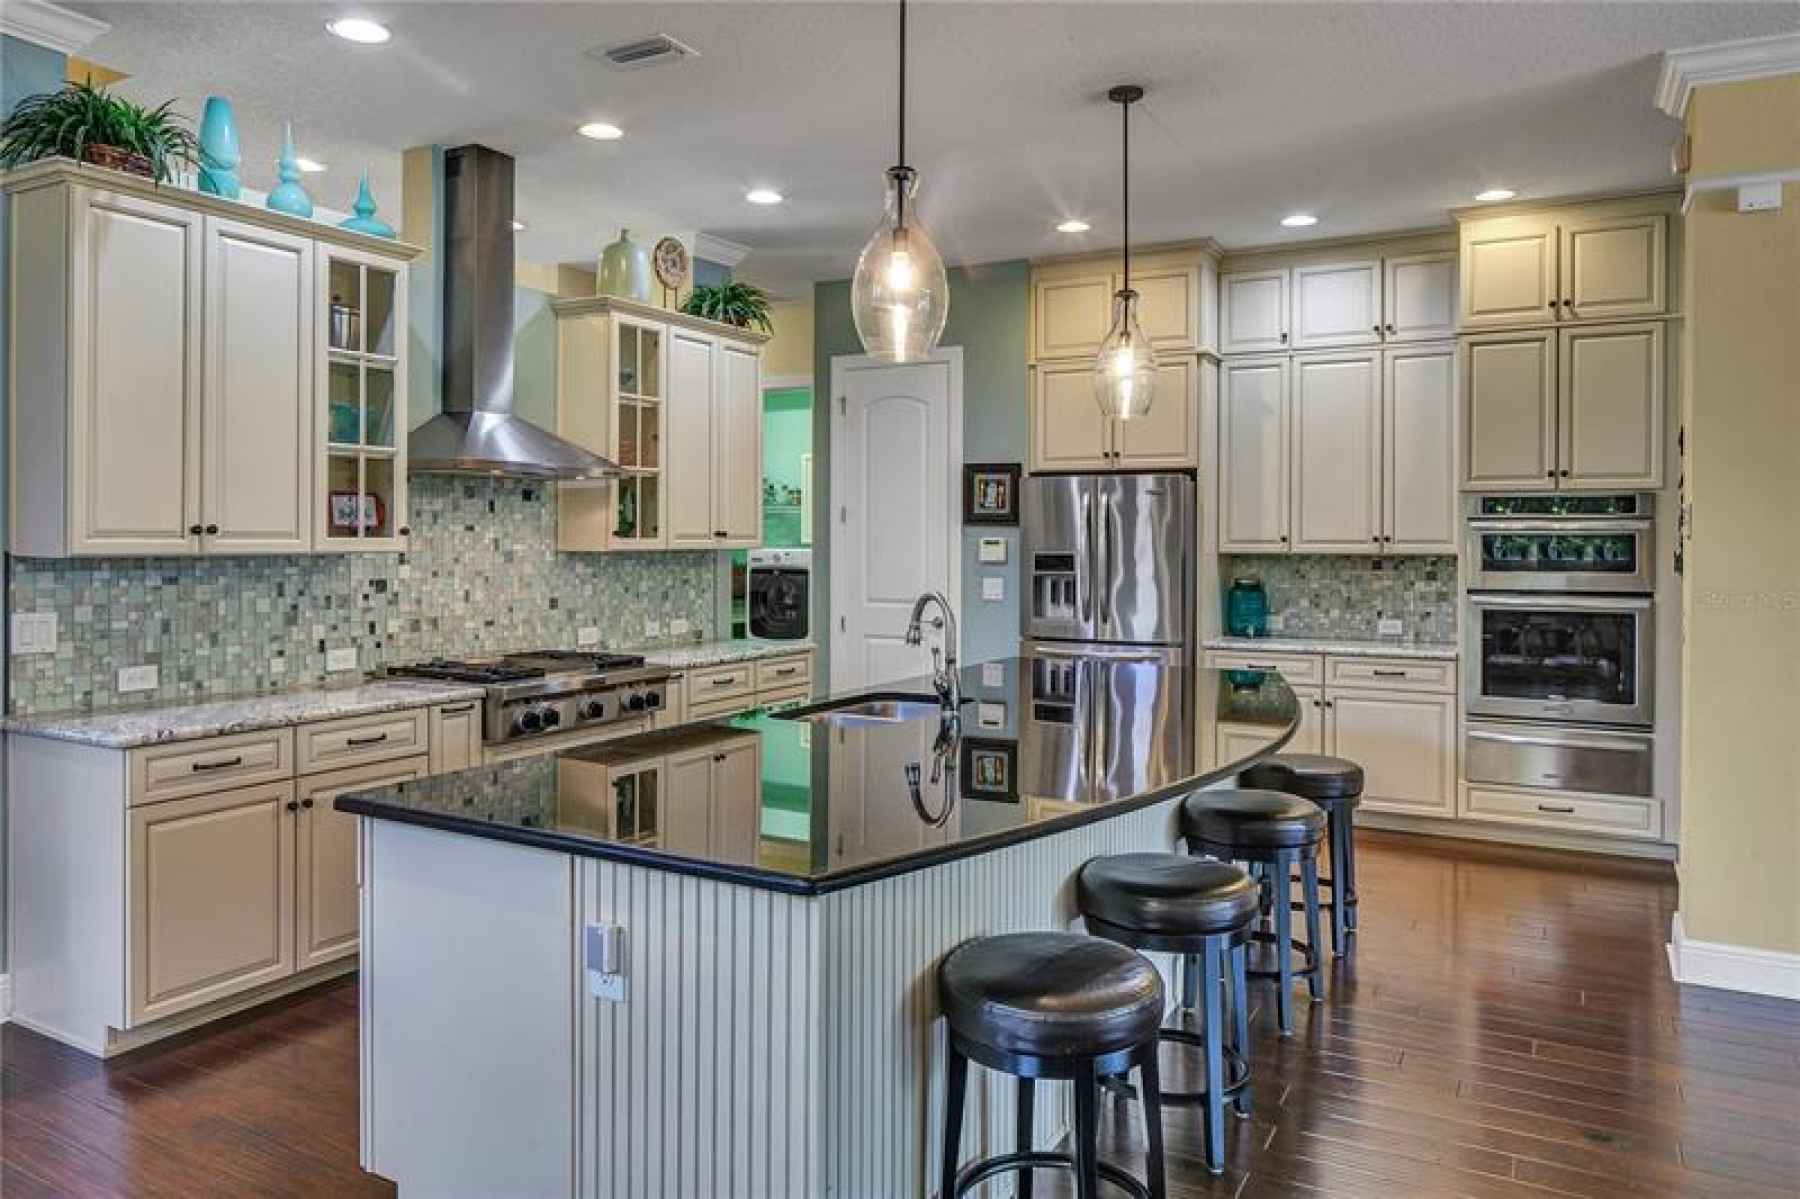 Gourmet kitchen with custom cabinets, granite countertops and Kitchen Aid Stainless Steel Appliances